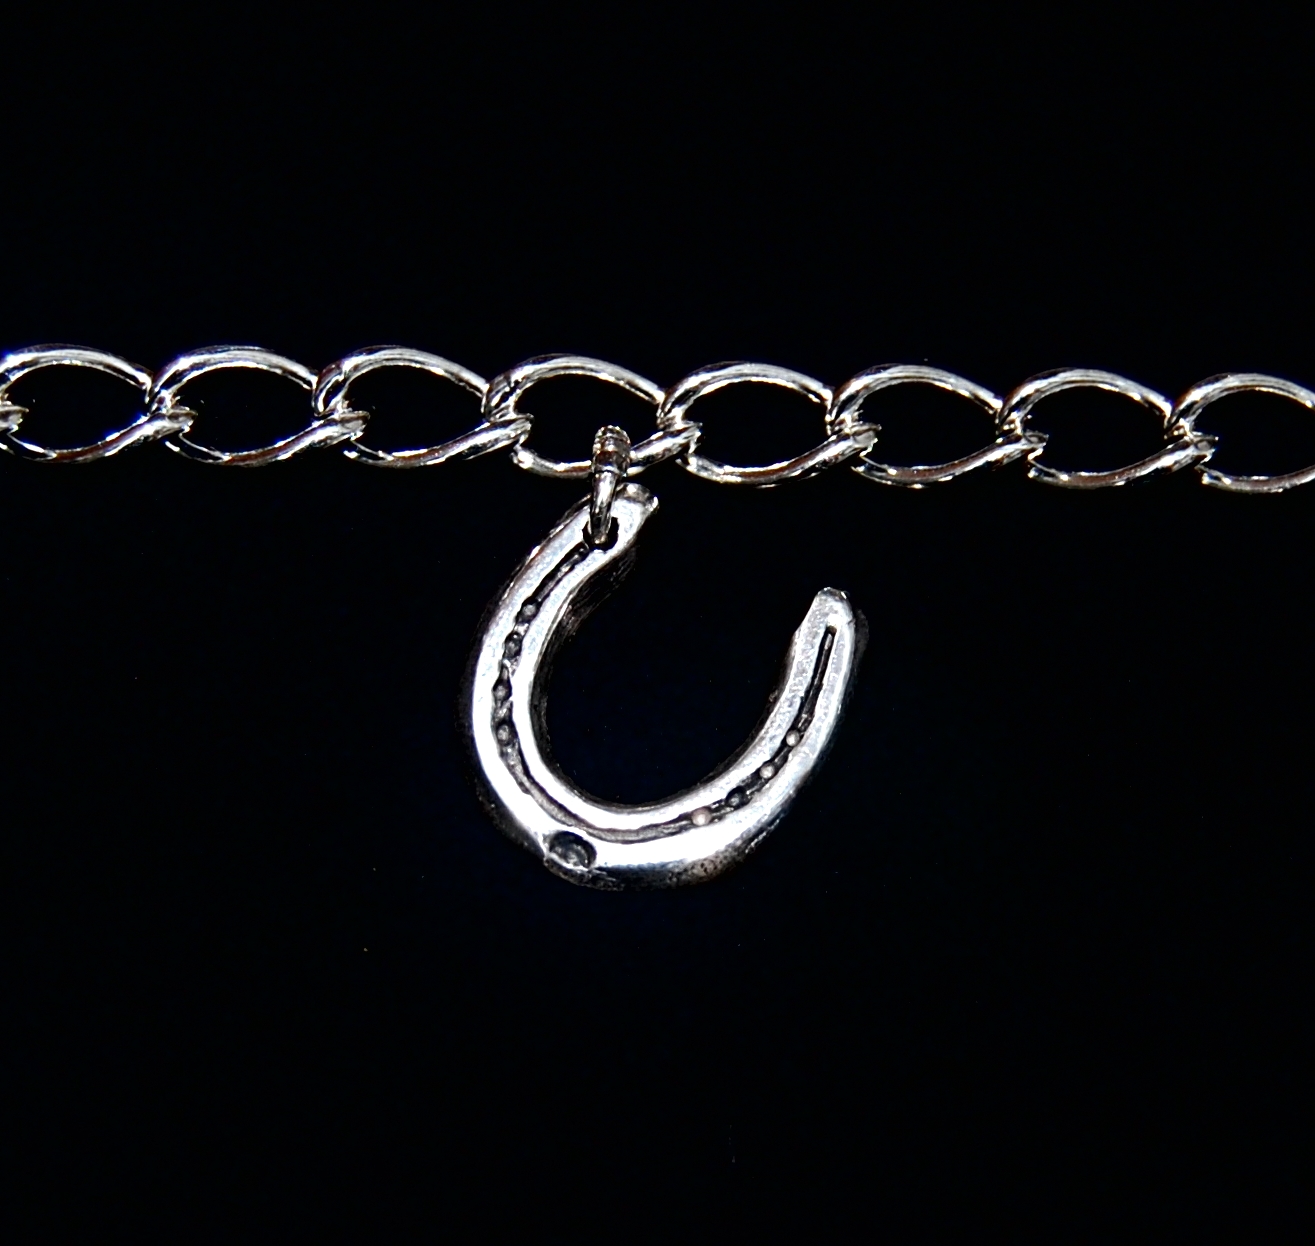 Small horse shoe cut out charm presented on a T-bar curb chain bracelet. Bracelet can be purchased separately.